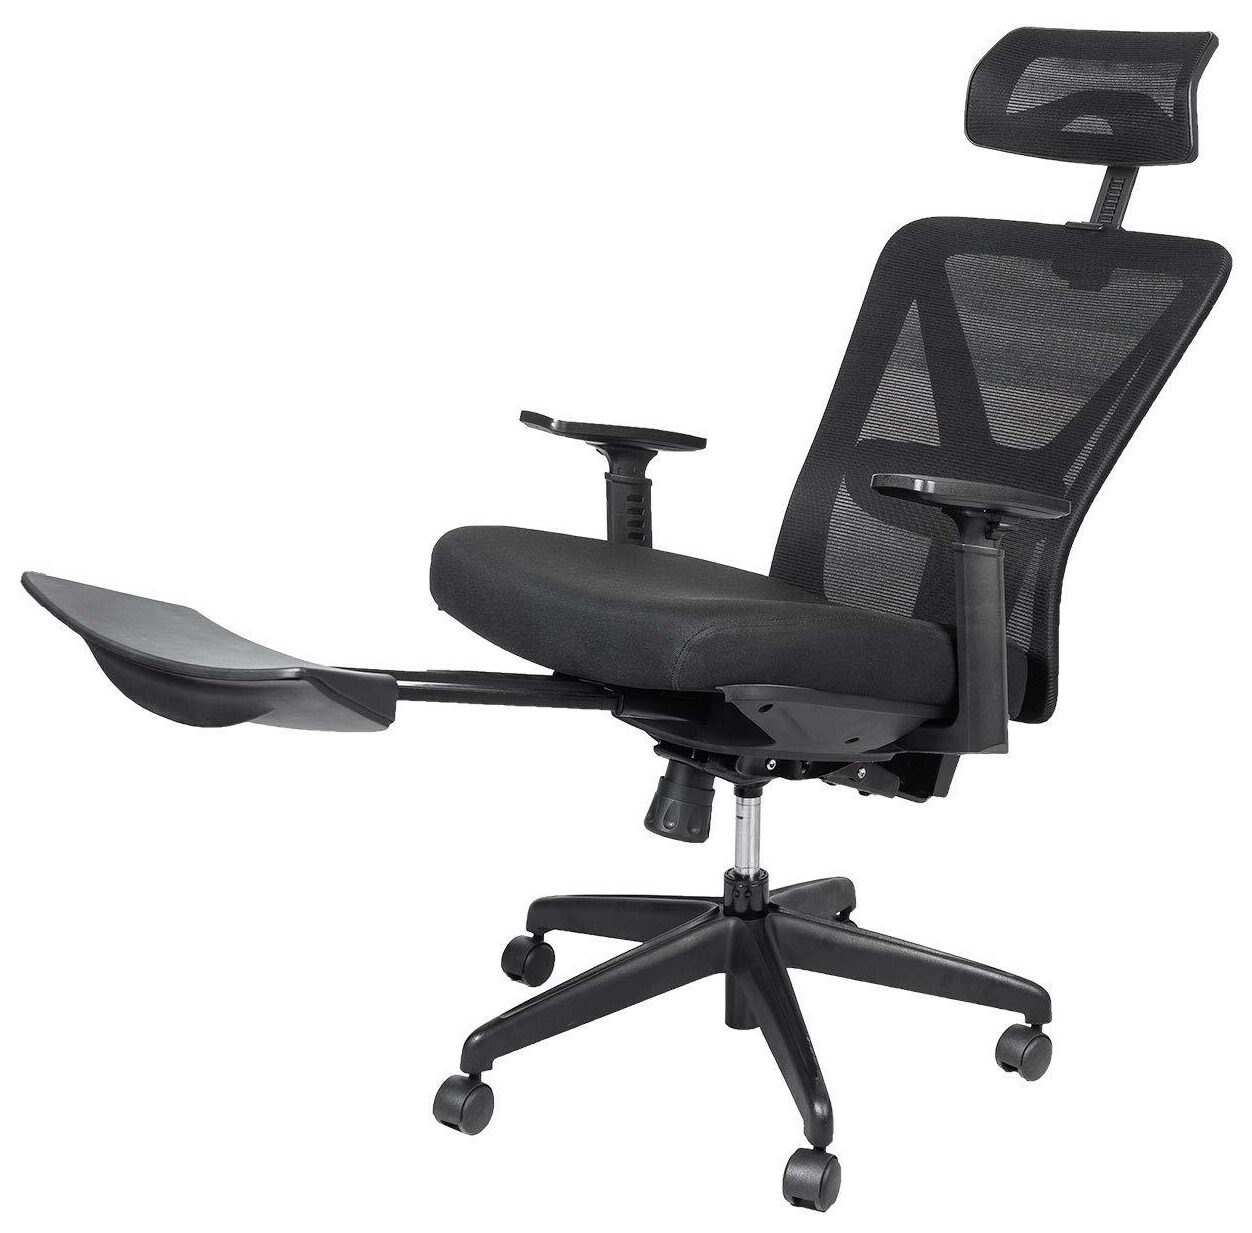 Bonzy Home Office Chair